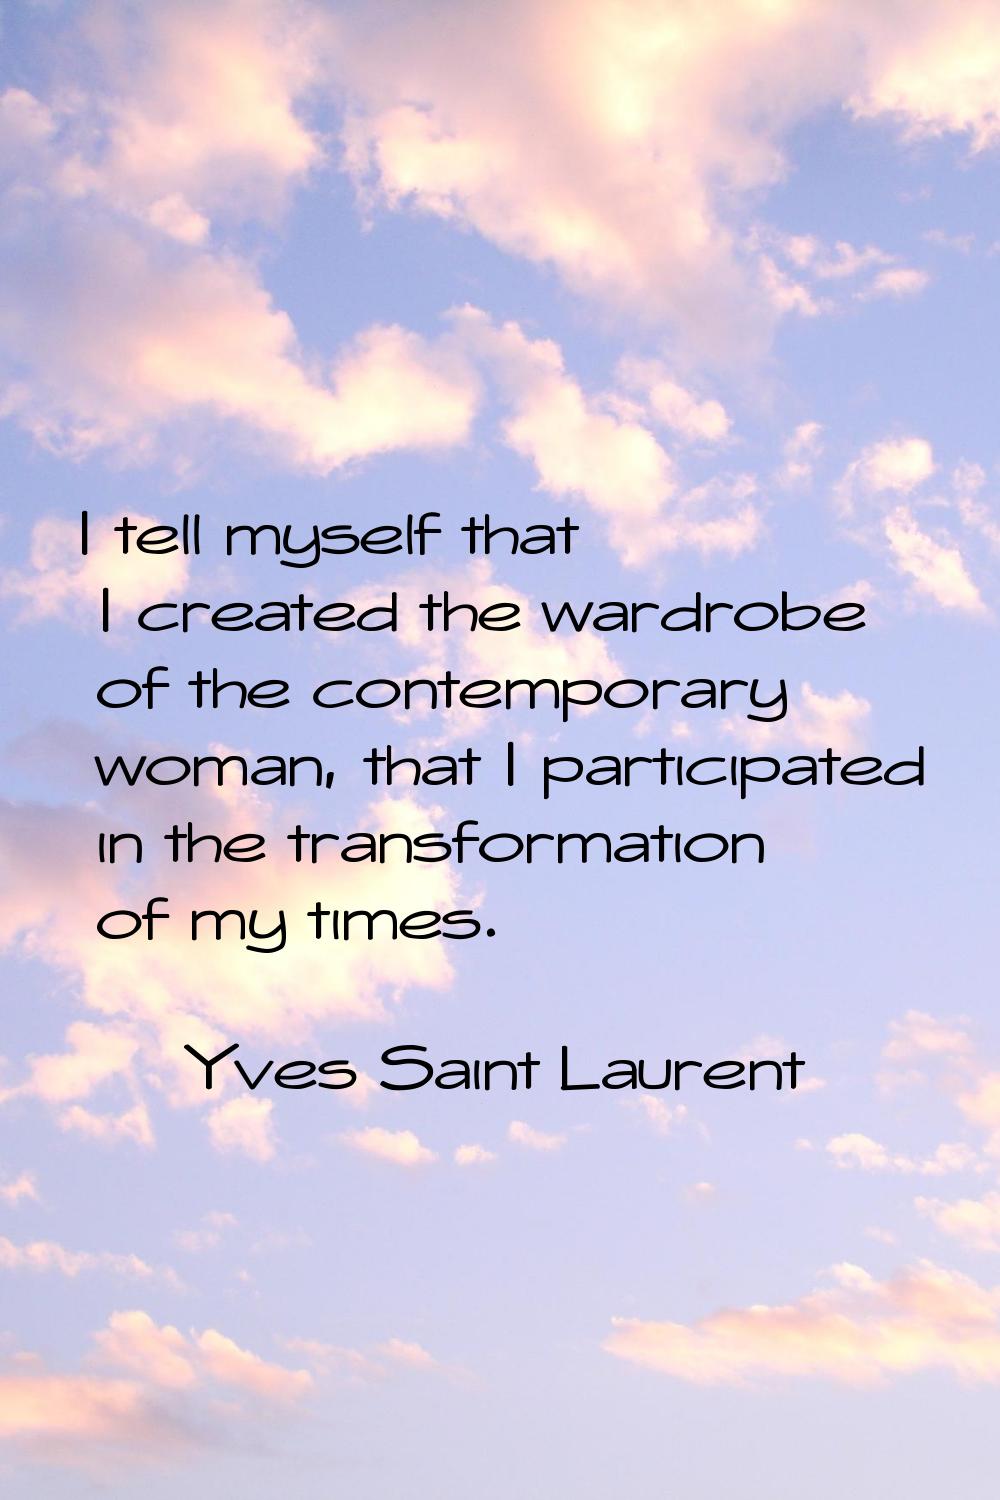 I tell myself that I created the wardrobe of the contemporary woman, that I participated in the tra